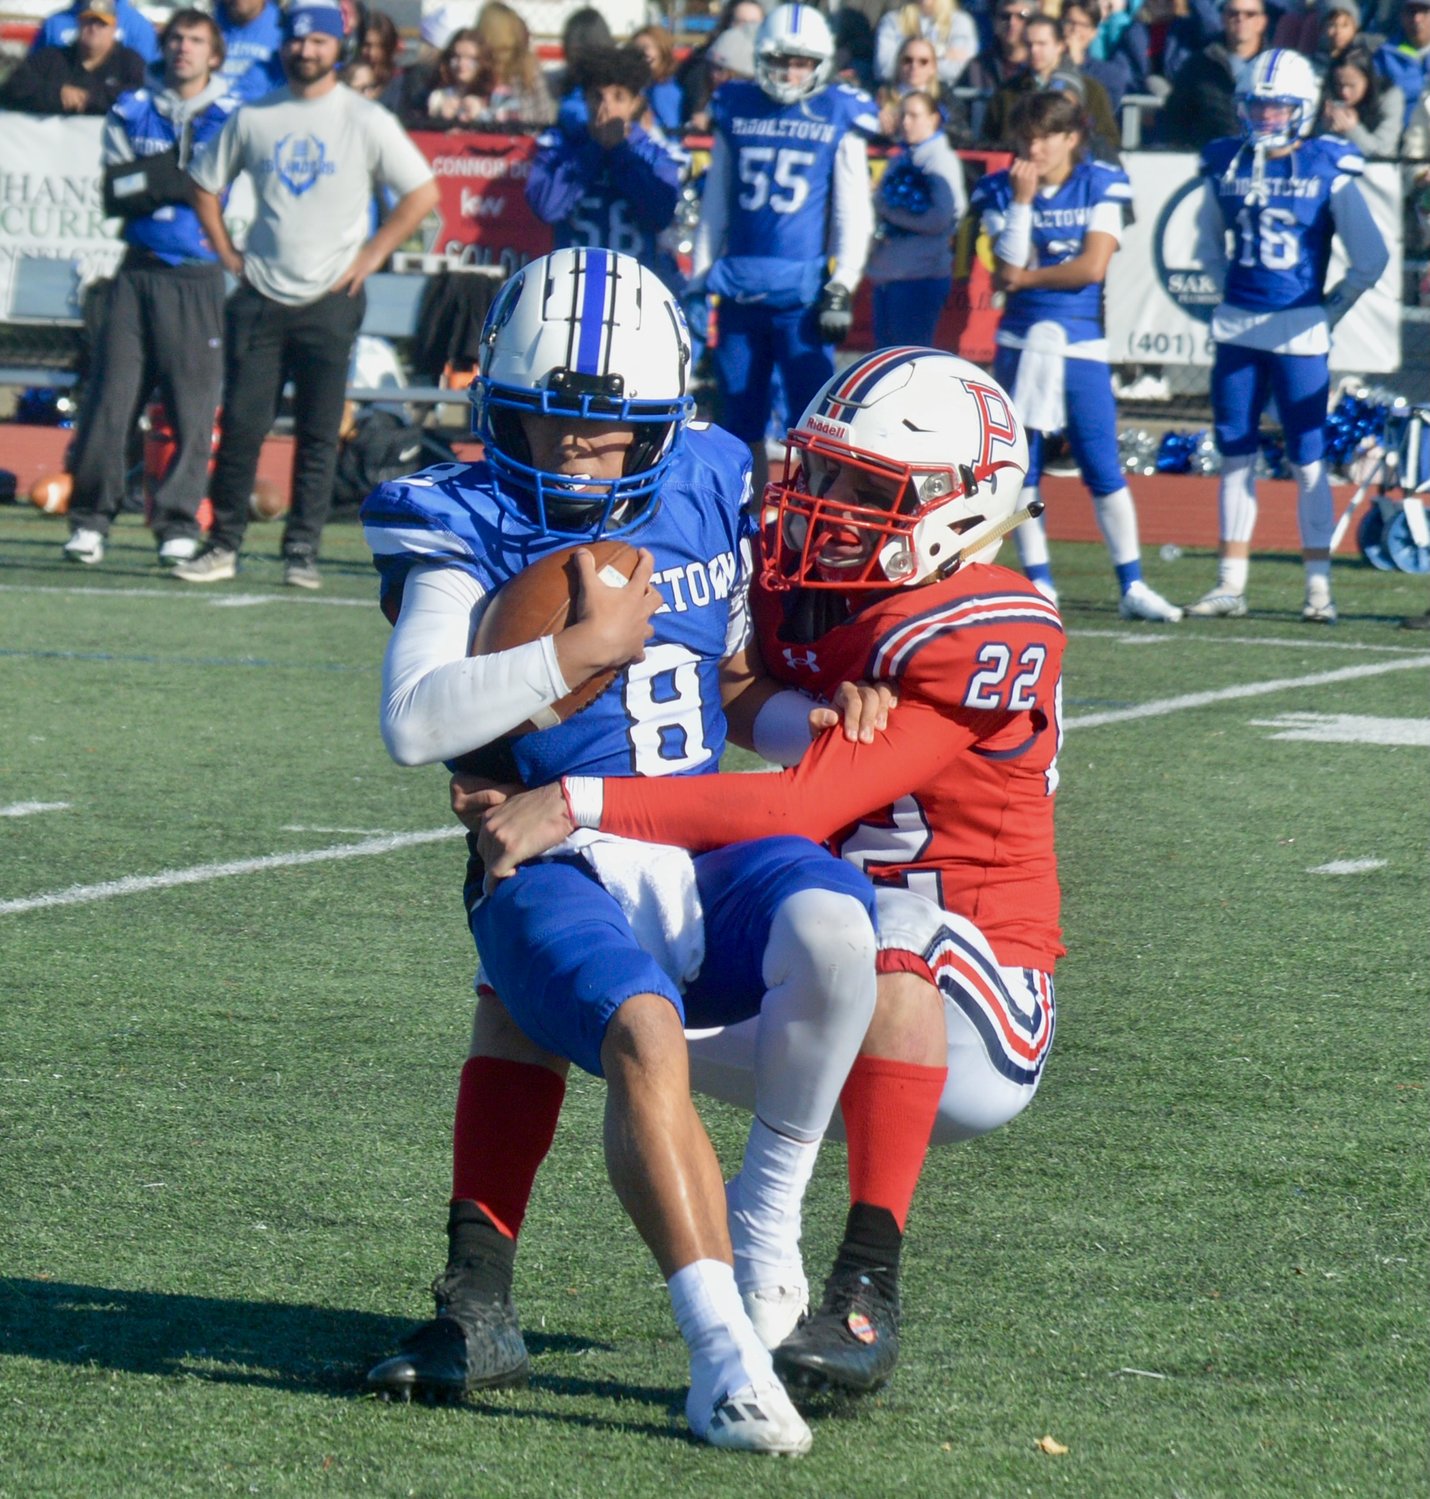 Middletown High quarterback Julien de la Cruz is muscled down by Portsmouth’s Dylan Brandariz for a big third-down loss in the second half, forcing the Islanders to punt.